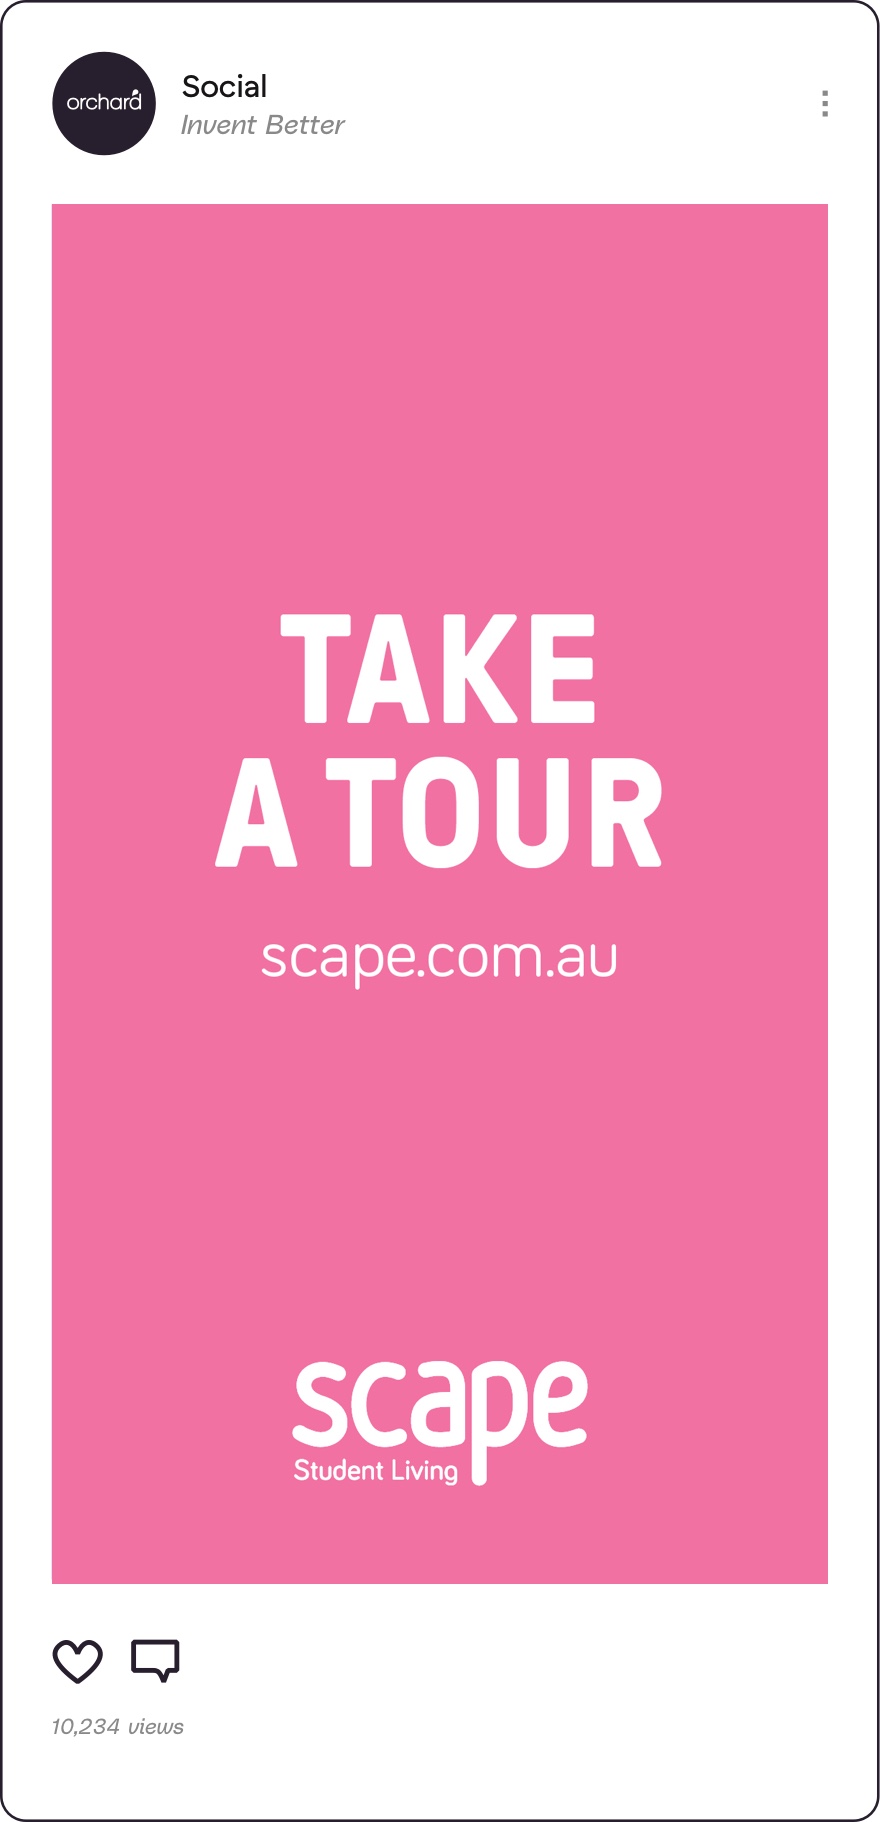 Scape student living 'Take a Tour' ad on social media